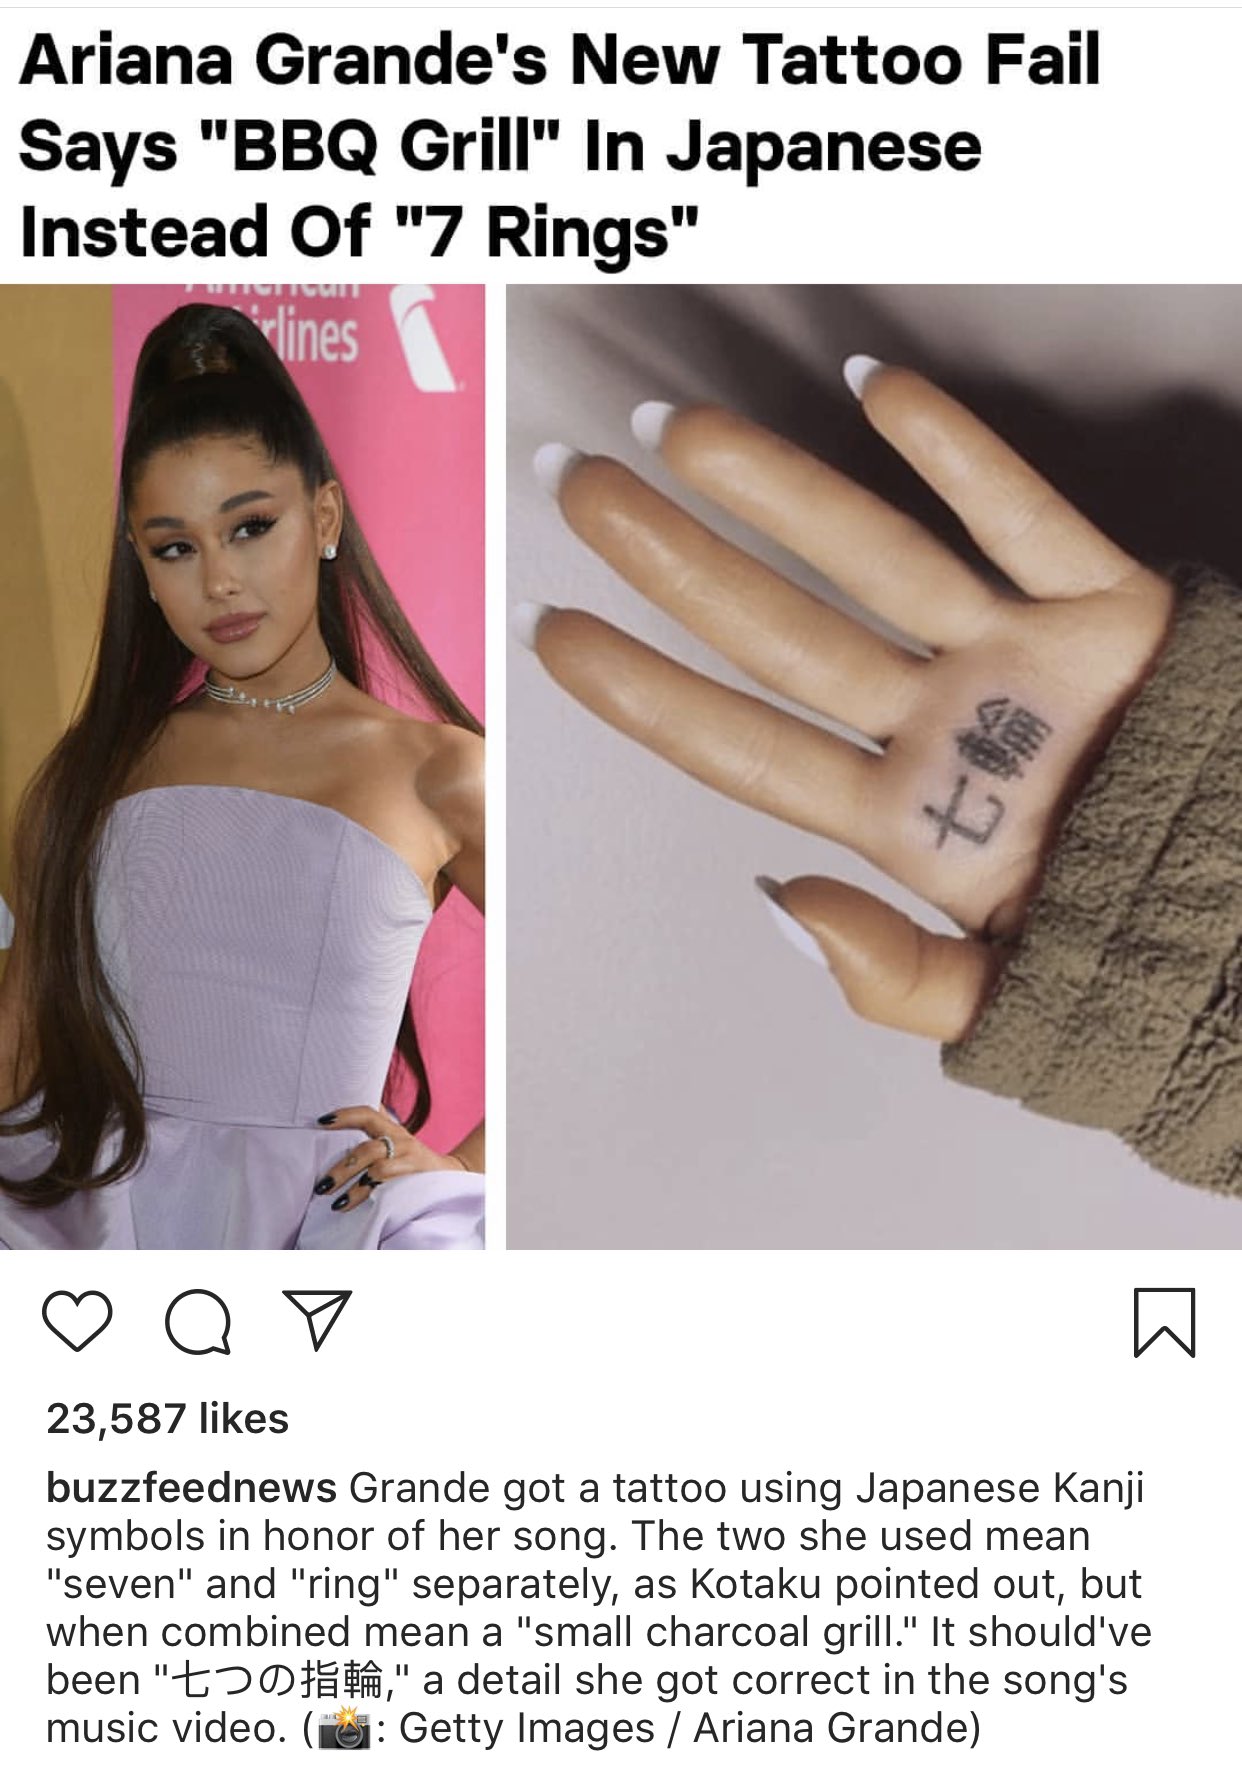 Oops? Ariana Grande's New Tattoo Contains a Pretty Major Misspelling